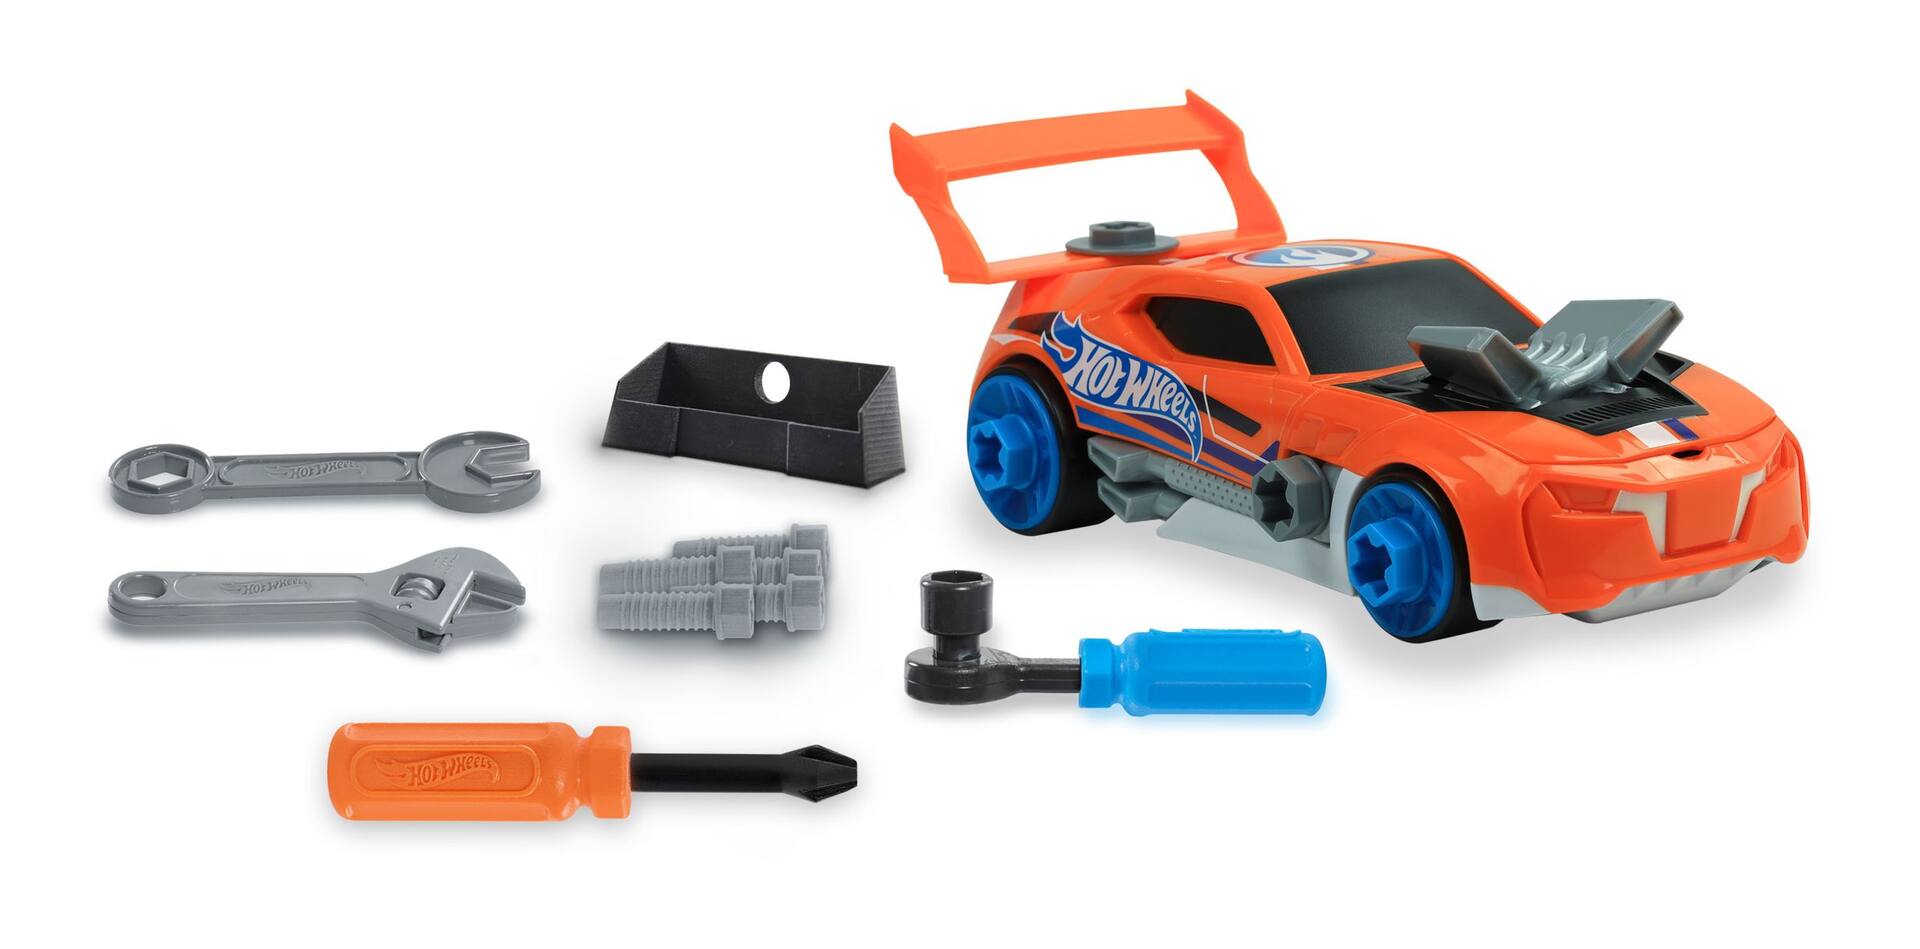 Hot Wheels Ready-To-Race Car Builder Tool Kit, 24-Piece Toy